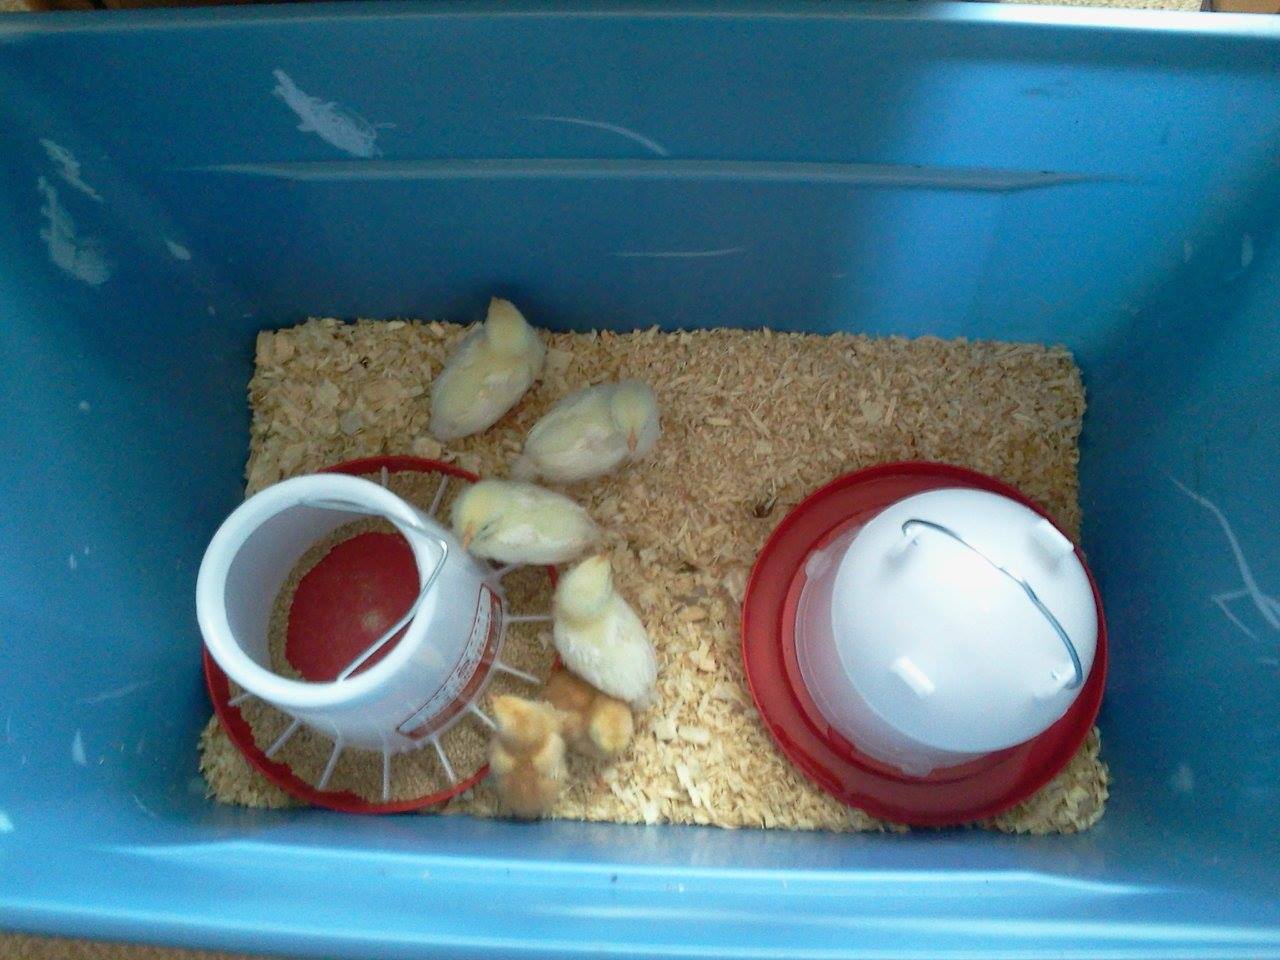 *
This is our redneck incubator we raised our first 6 hens in. They were raised in our office room. Two totes together worked nicely. Now we use it for sick or dying birds. Or new flock until roosting time and then add them to the coop.